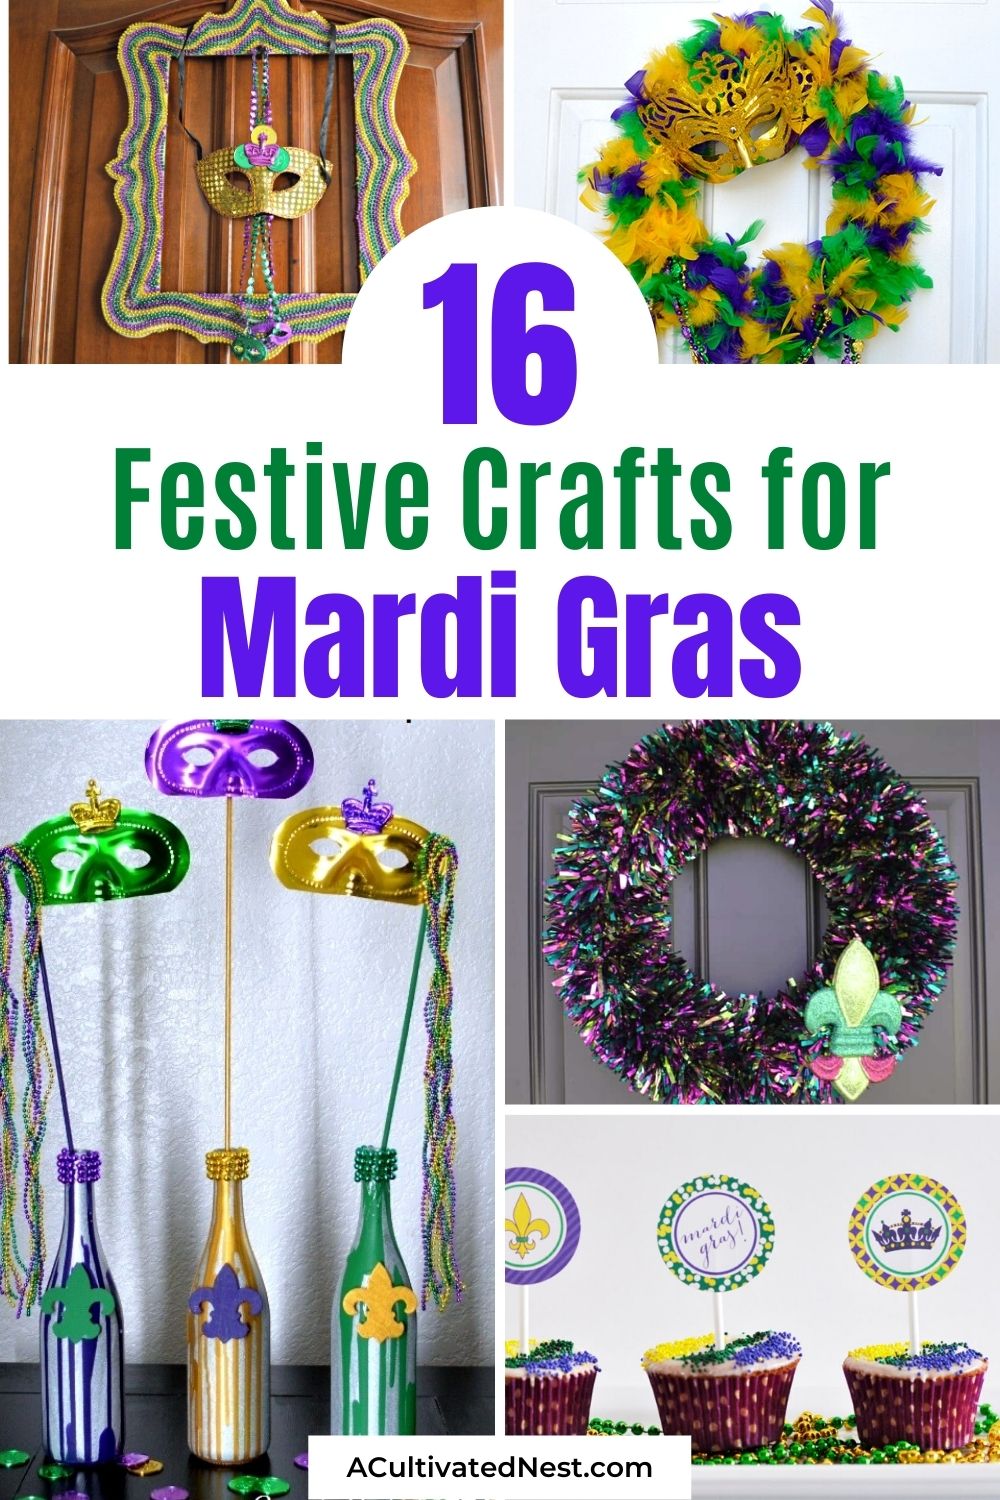 16 Festive Mardi Gras Crafts- If you want to get your home ready for Mardi Gras on a budget, then you need to check out these festive Mardi Gras crafts! They're a fun and easy way to spruce up your space for your celebration! | homemade Mardi Gras decorations, #mardiGrasDIYs #mardiGras #crafts #mardiGrasDecorations #ACultivatedNest